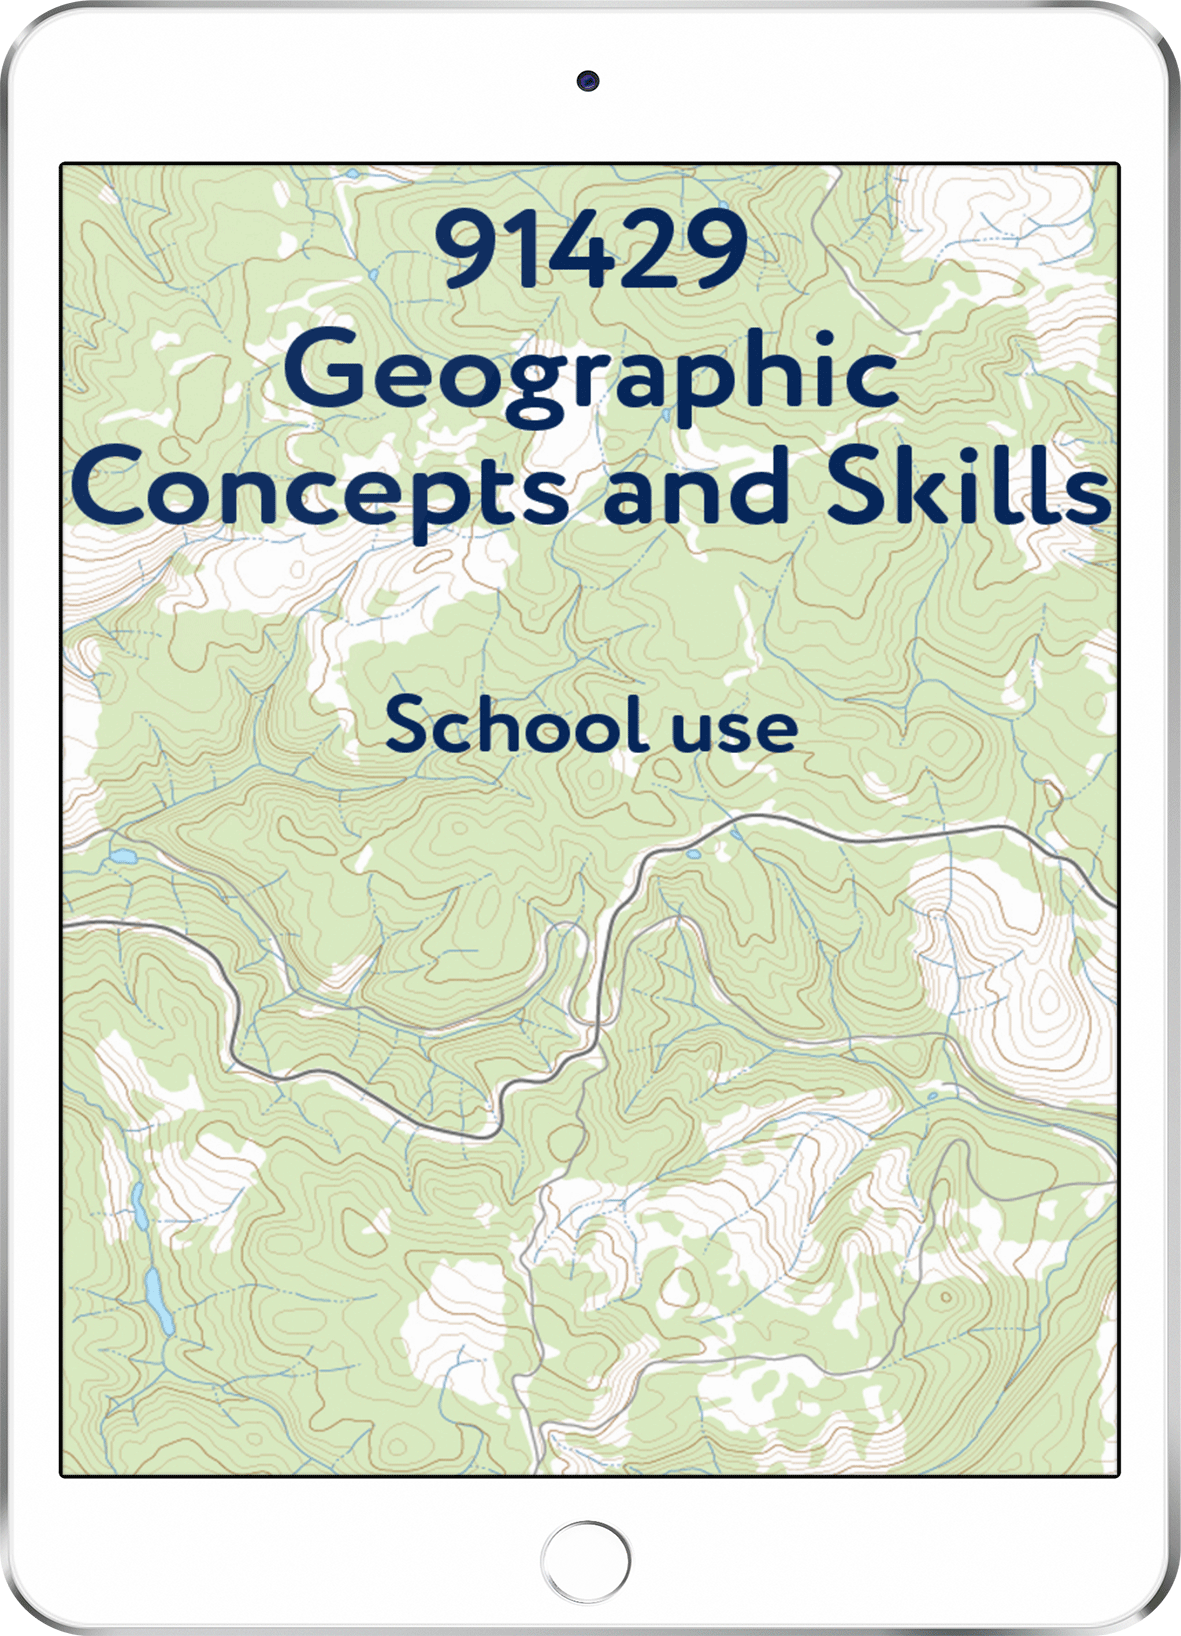 91429 Geographic Concepts and Skills - School Use